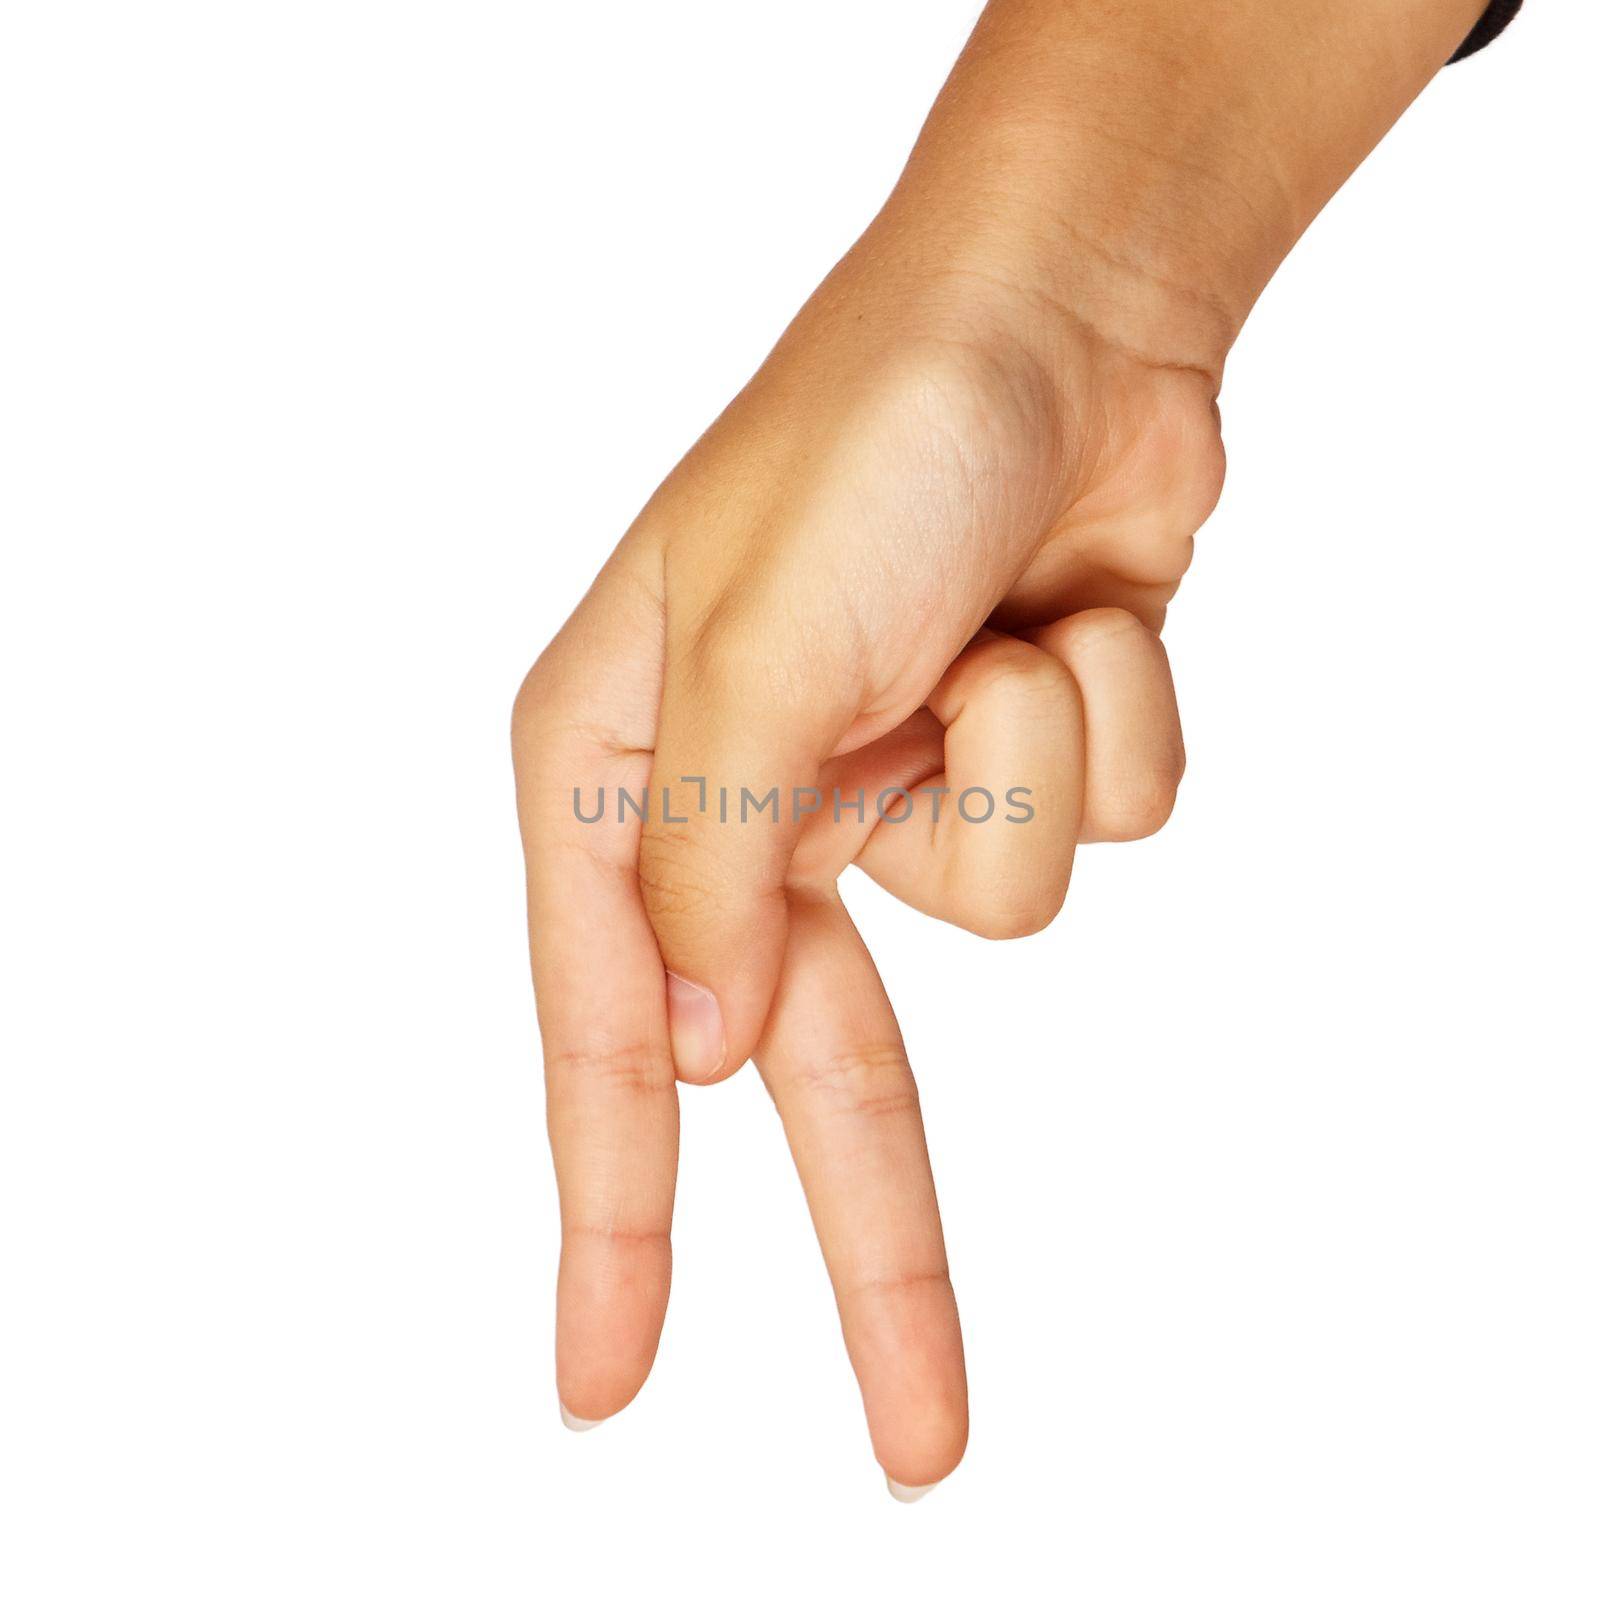 american sign language. female hand showing letter p by raddnatt